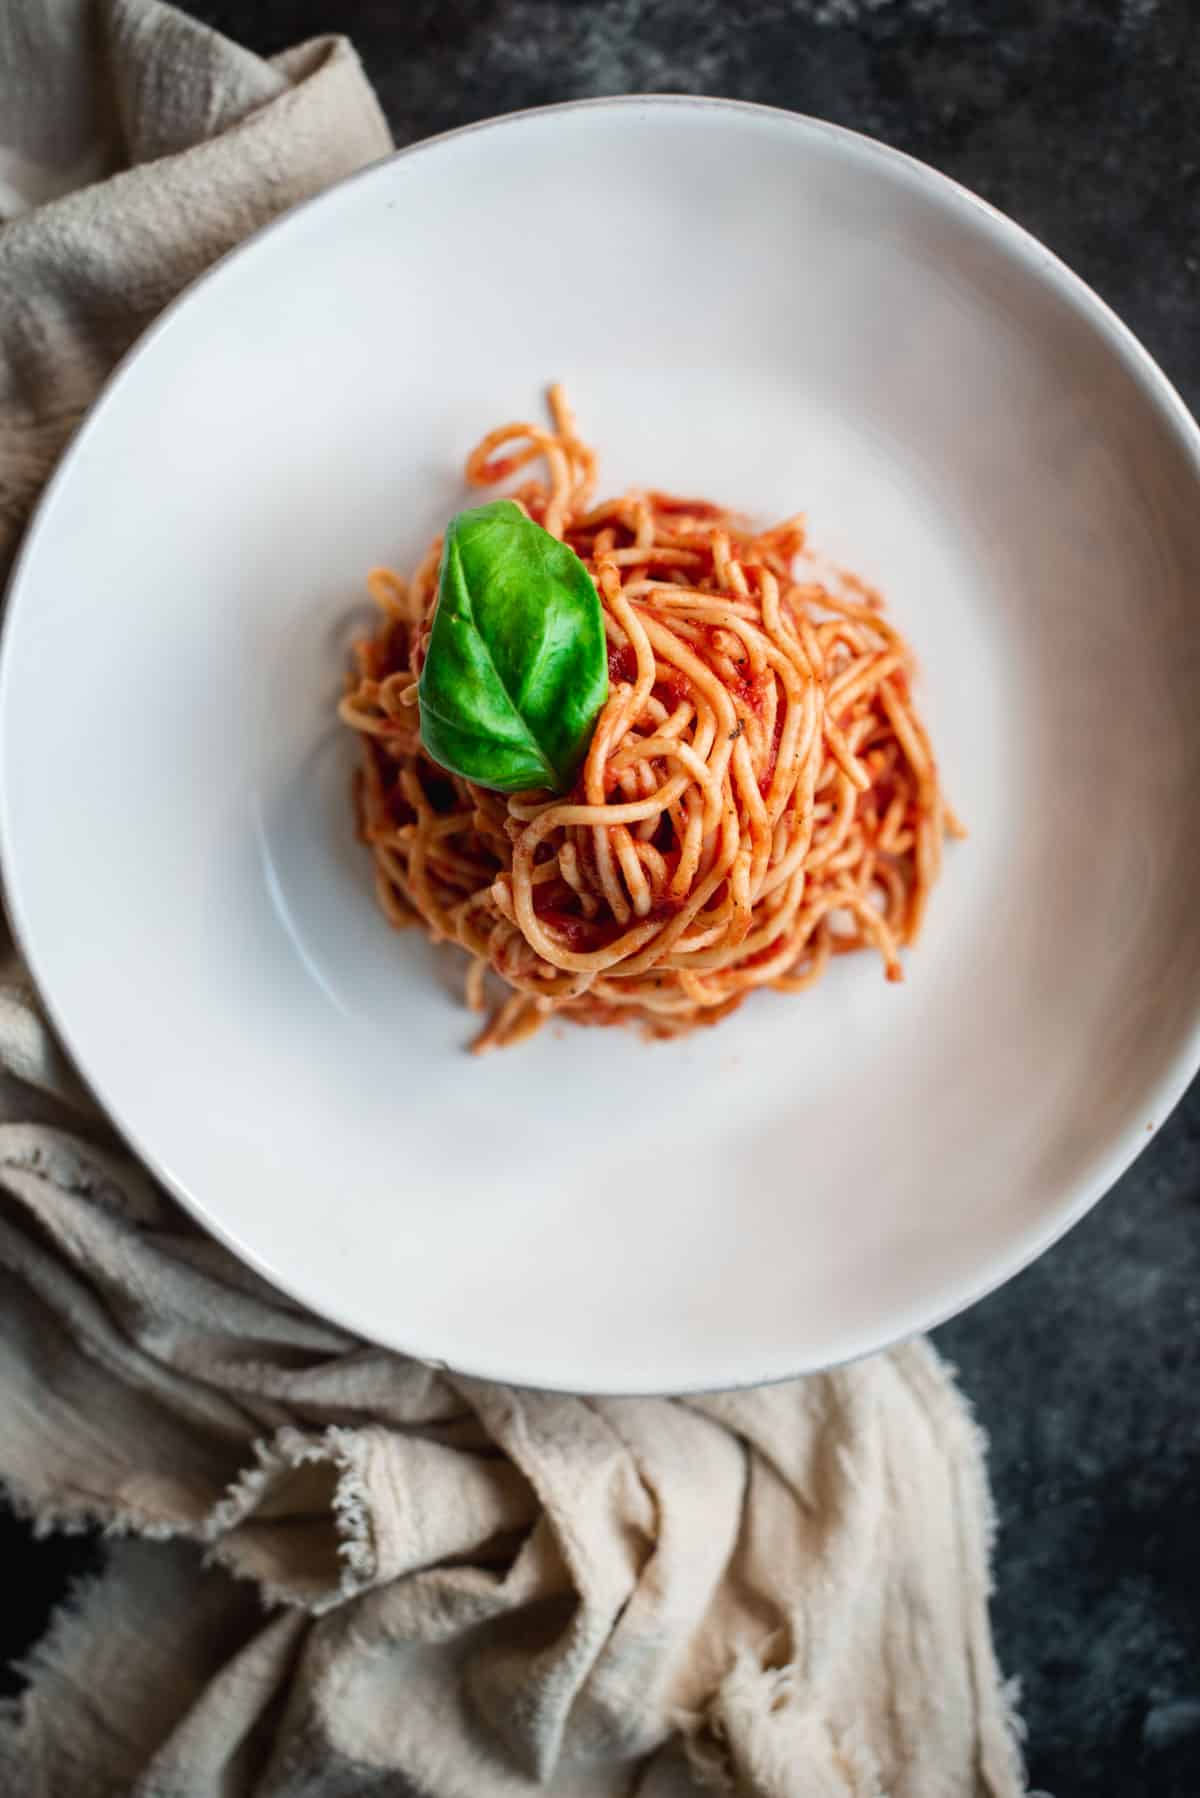 View from above of a tower of spaghetti mixed with easy homemade pasta sauce on a white plate and garnished with a fresh basil leaf.